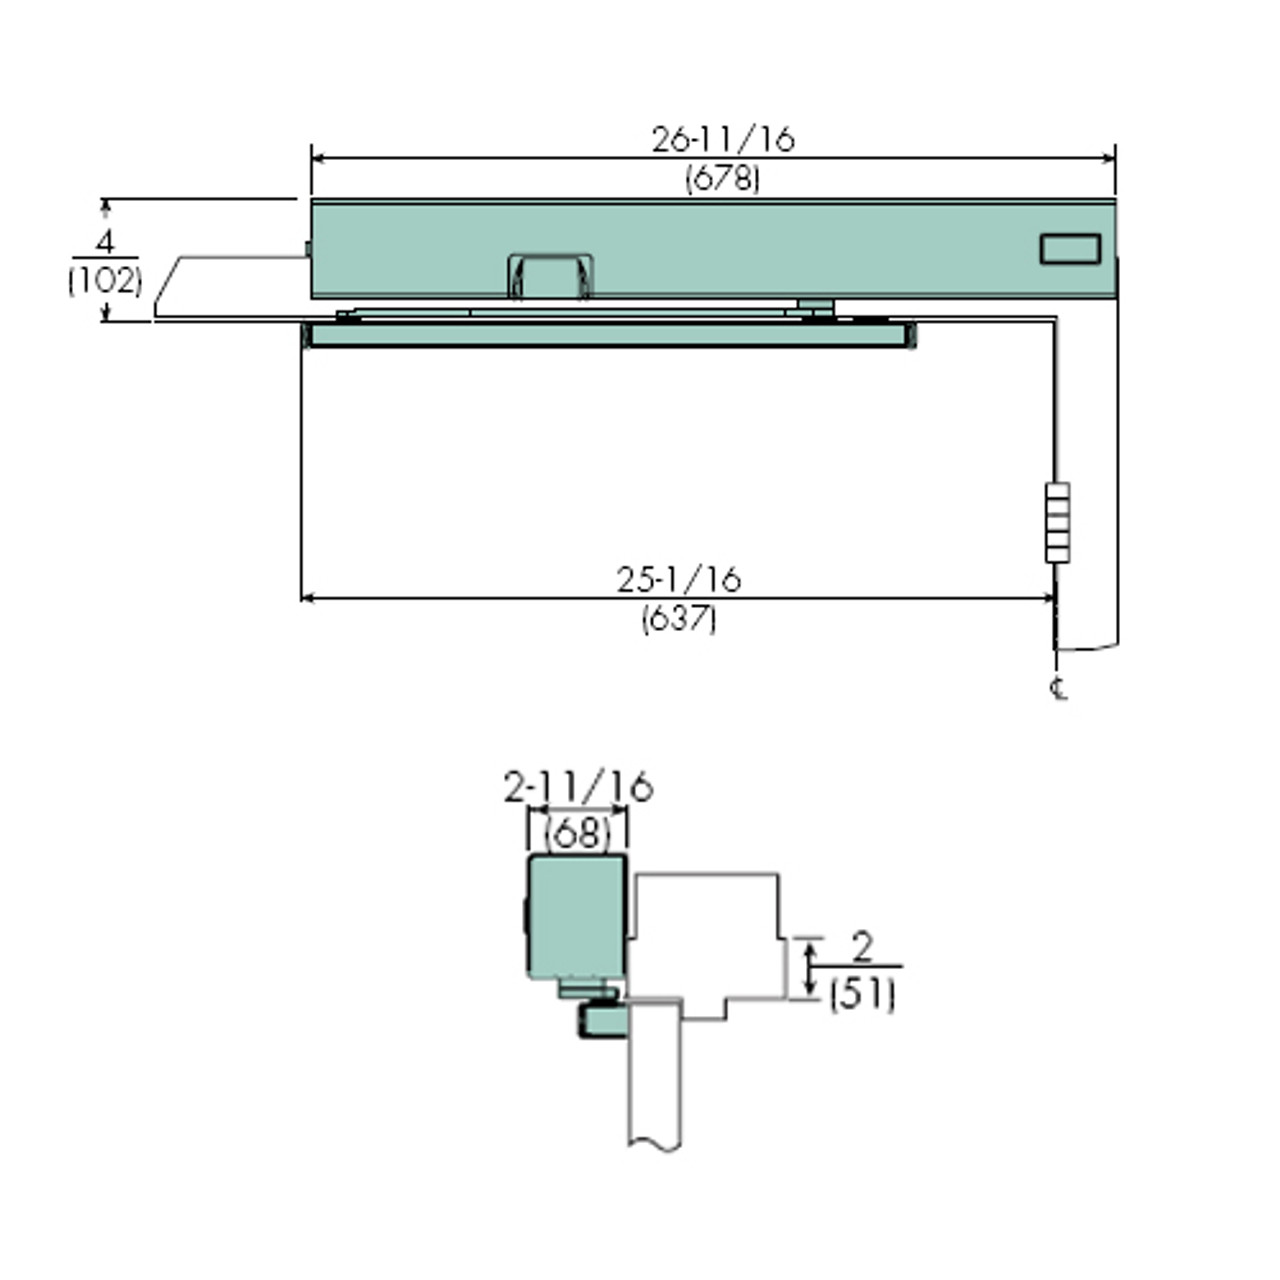 7154SZ-RH-24VDC-691 Norton 7100SZ Series Safe Zone Multi-Point Closer/Holder with Motion Sensor and Pull Side Double Egress Arm and Slide Track in Dull Bronze Finish